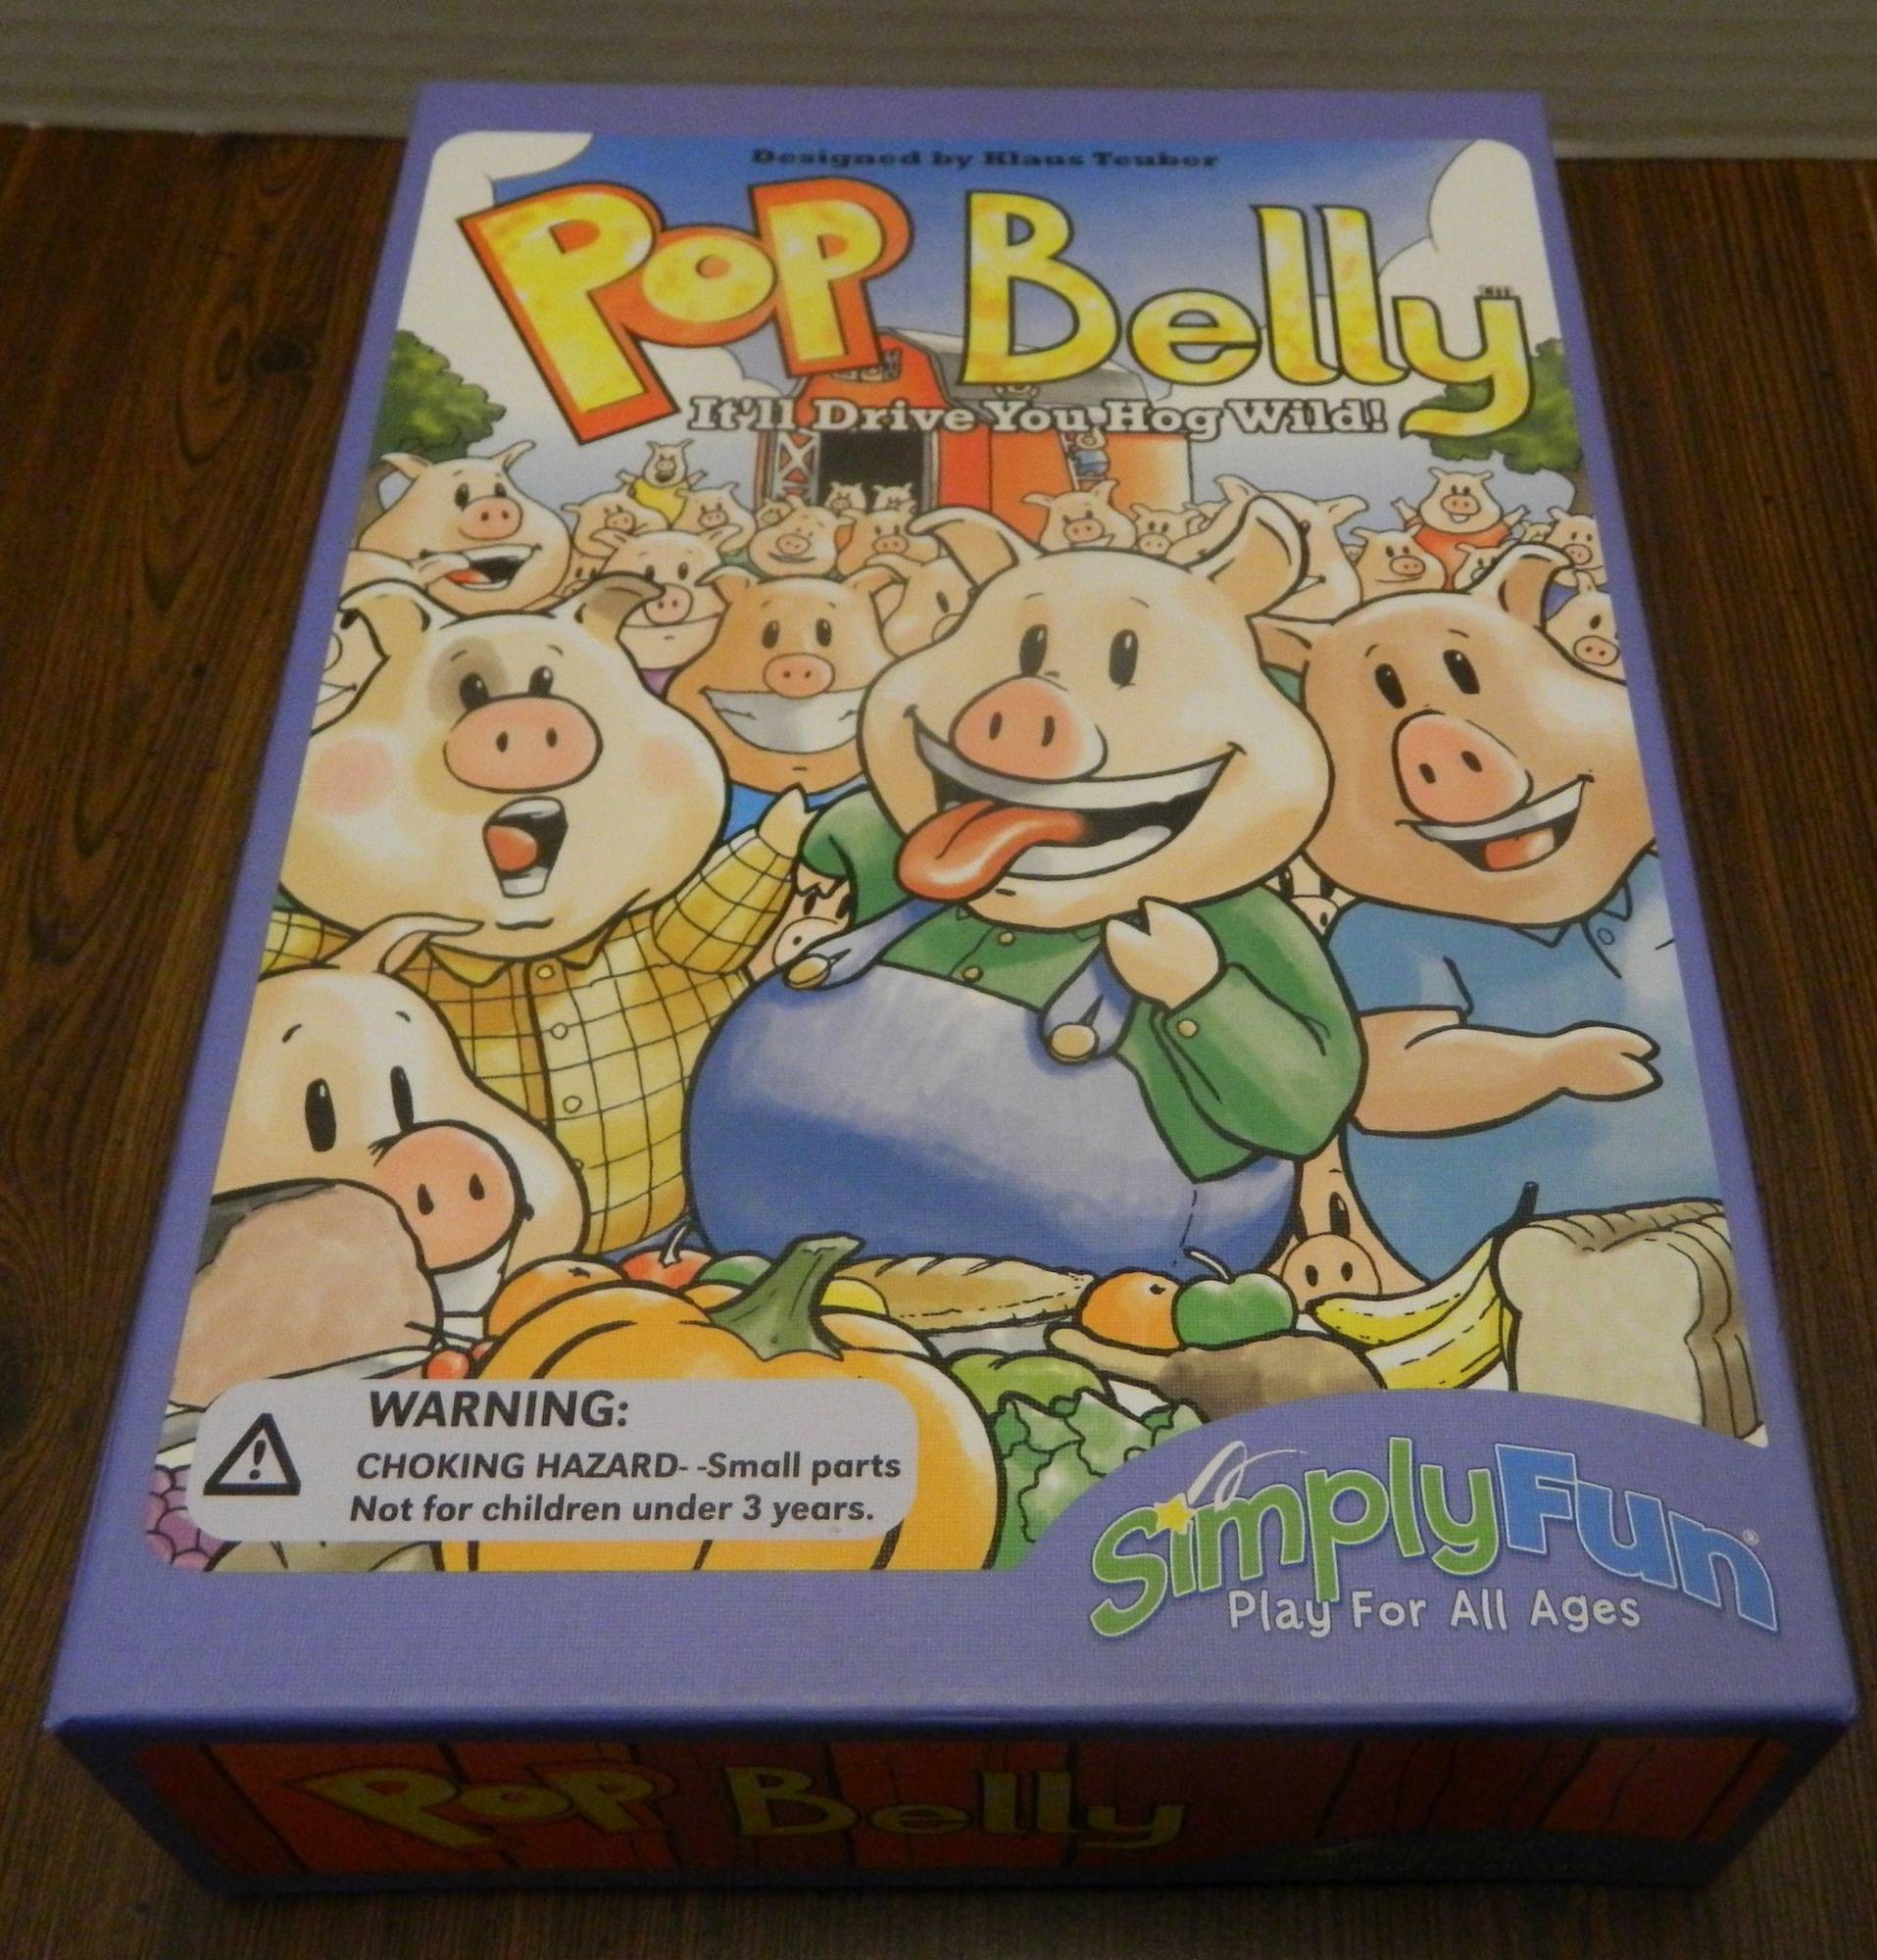 Pop Belly Board Game Review